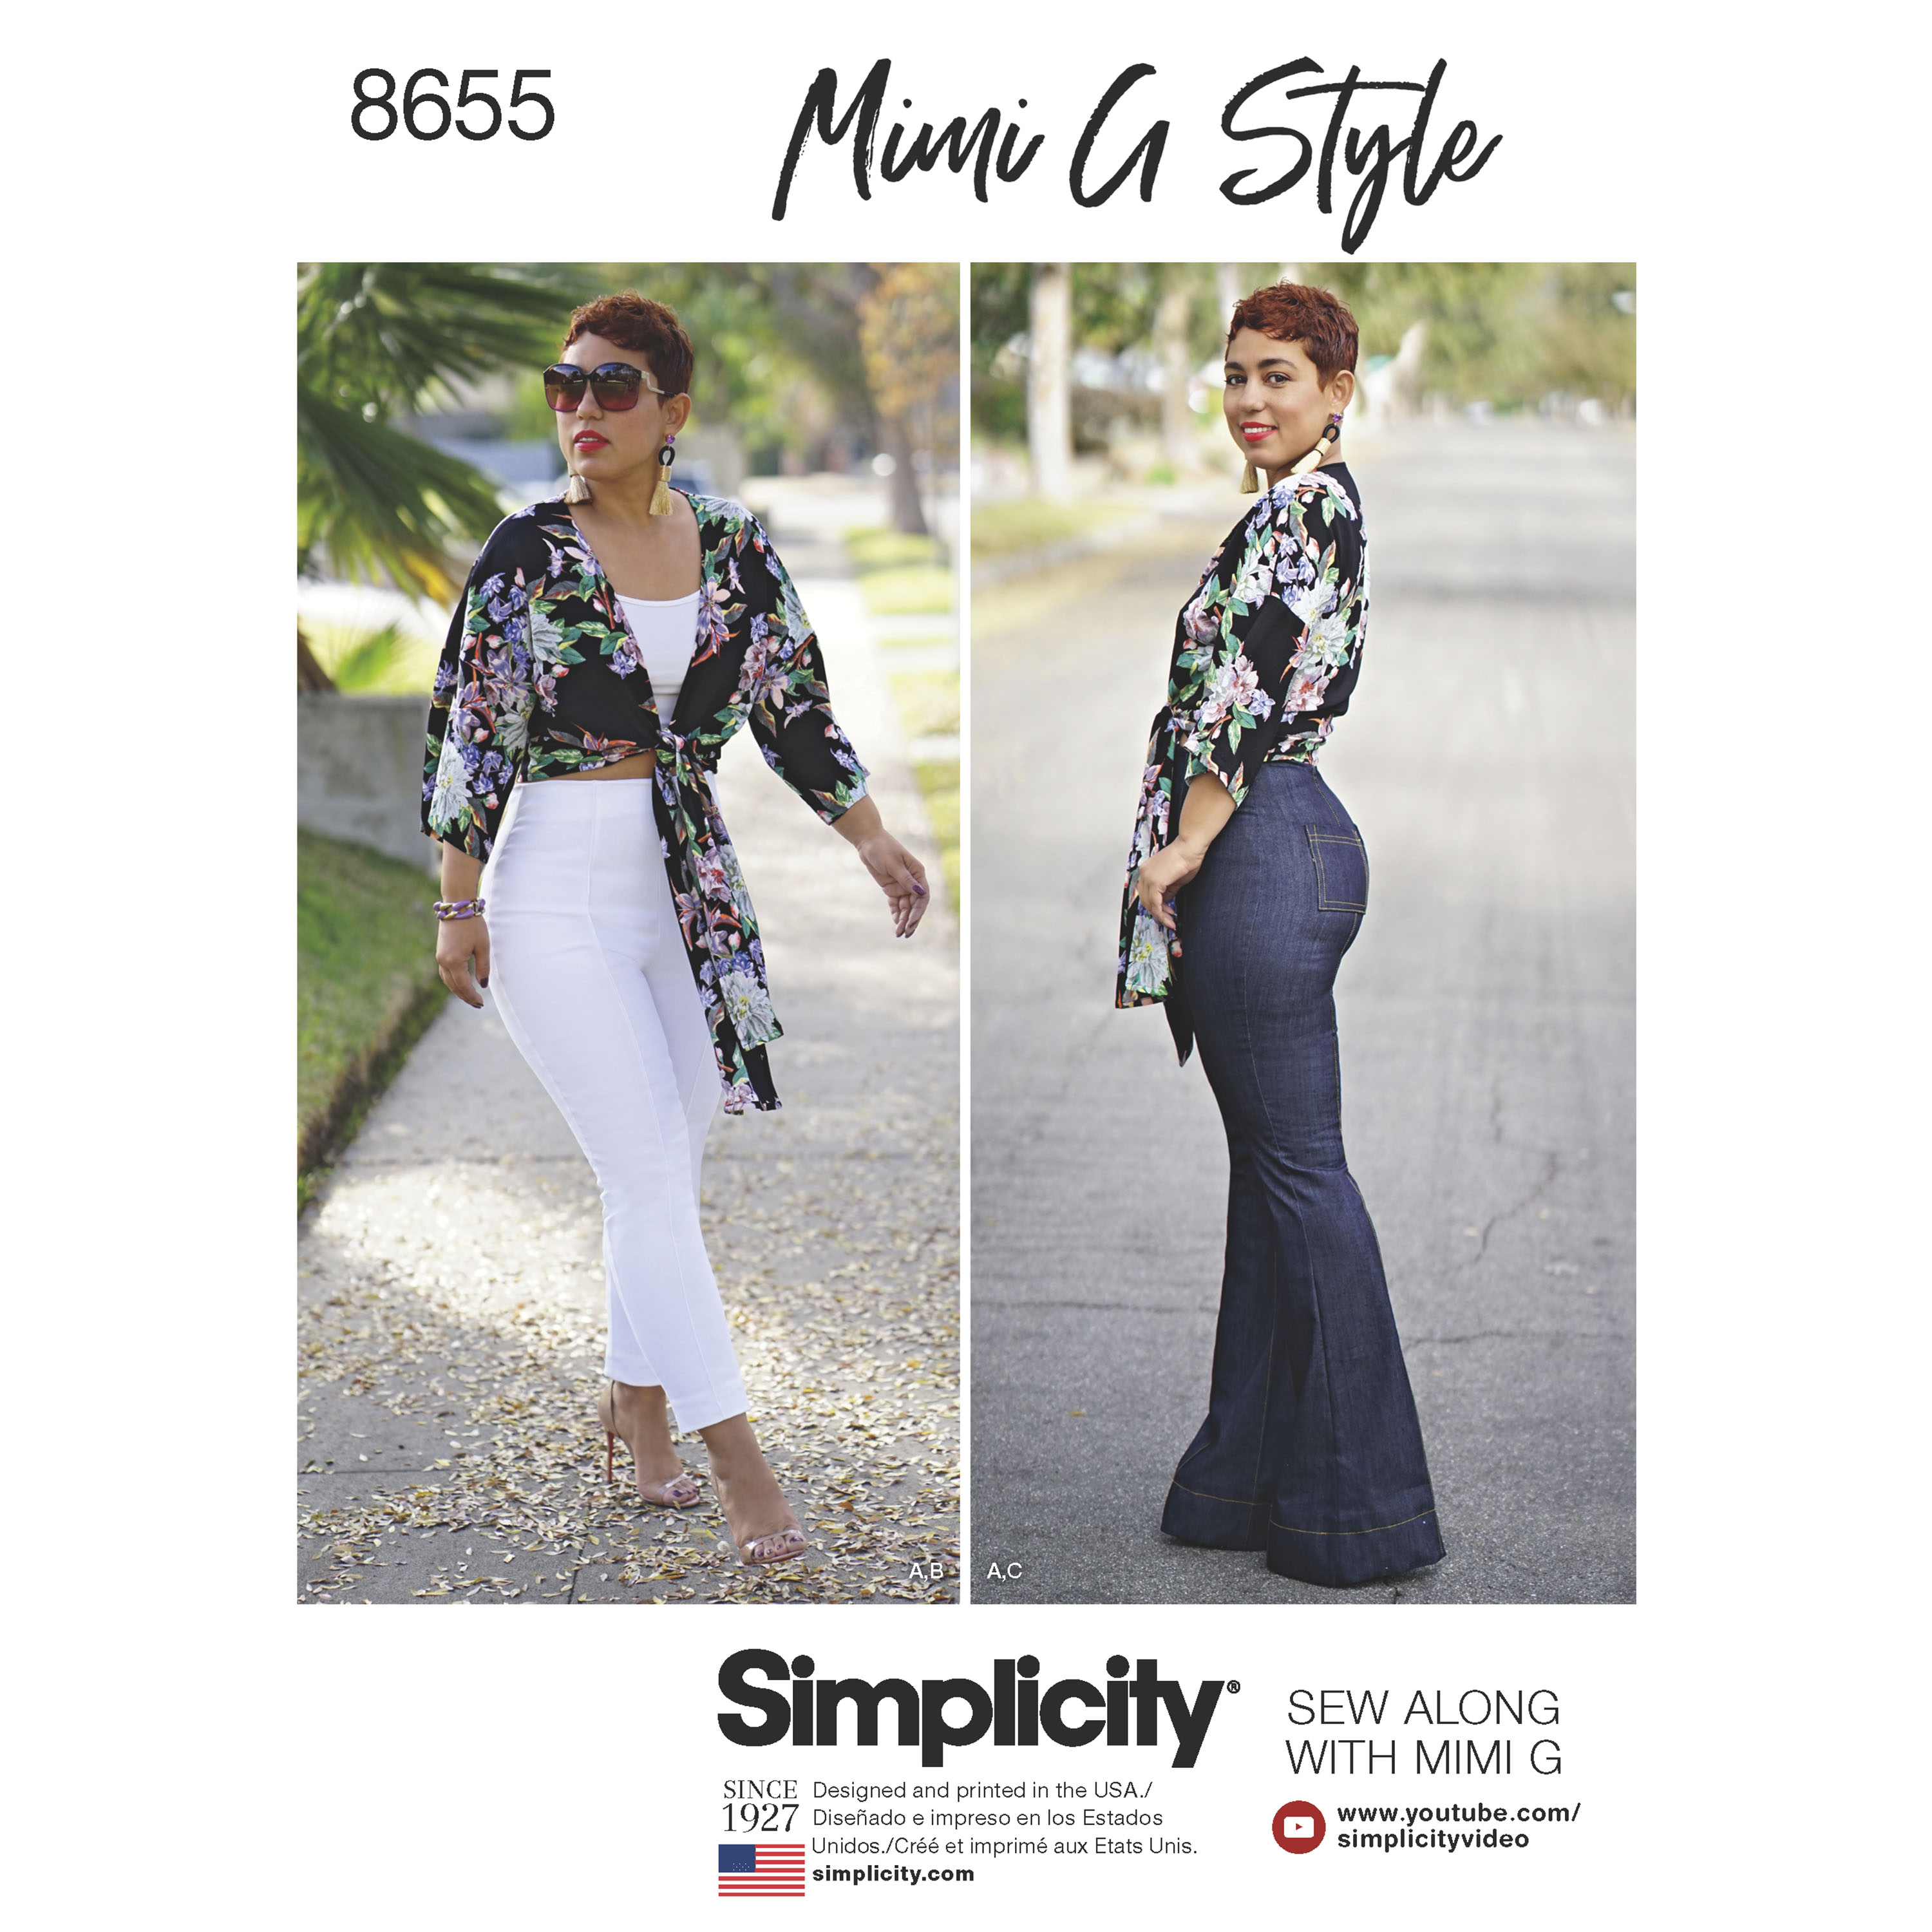 https://images.patternreview.com/sewing/patterns/simplicity/2018/8655/8655.jpg